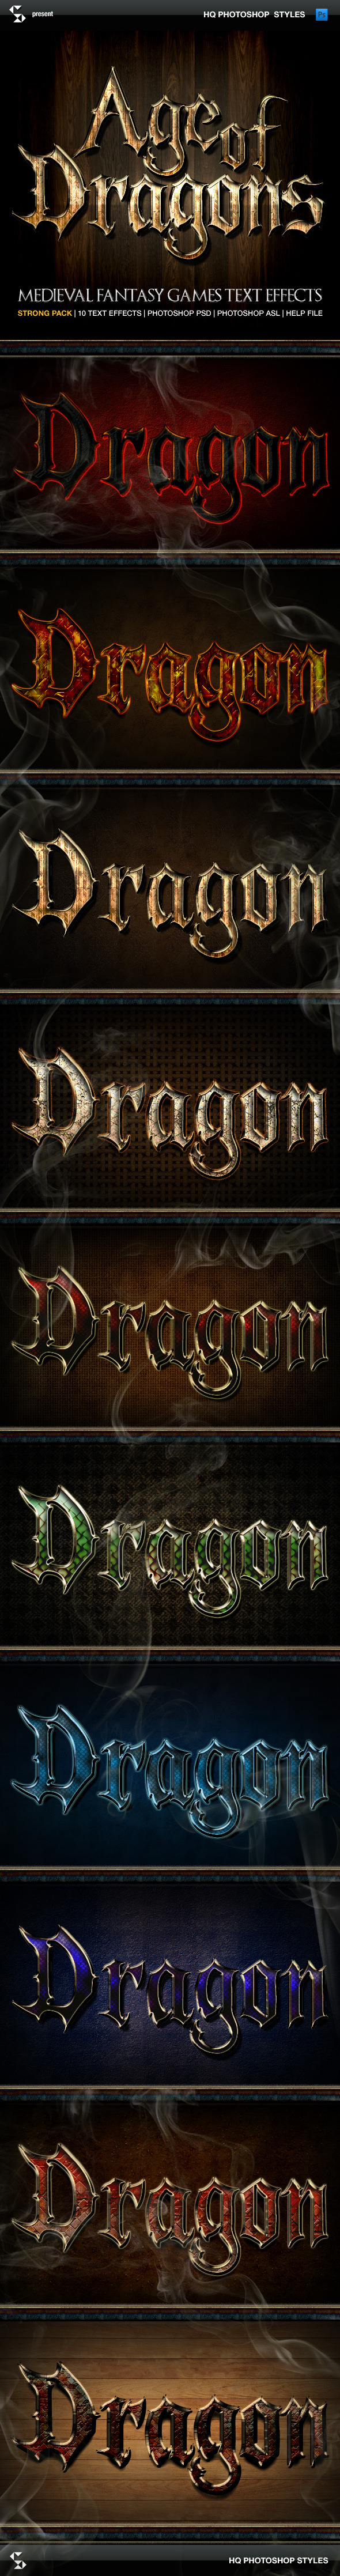 Fantasy Styles - Age of Dragons